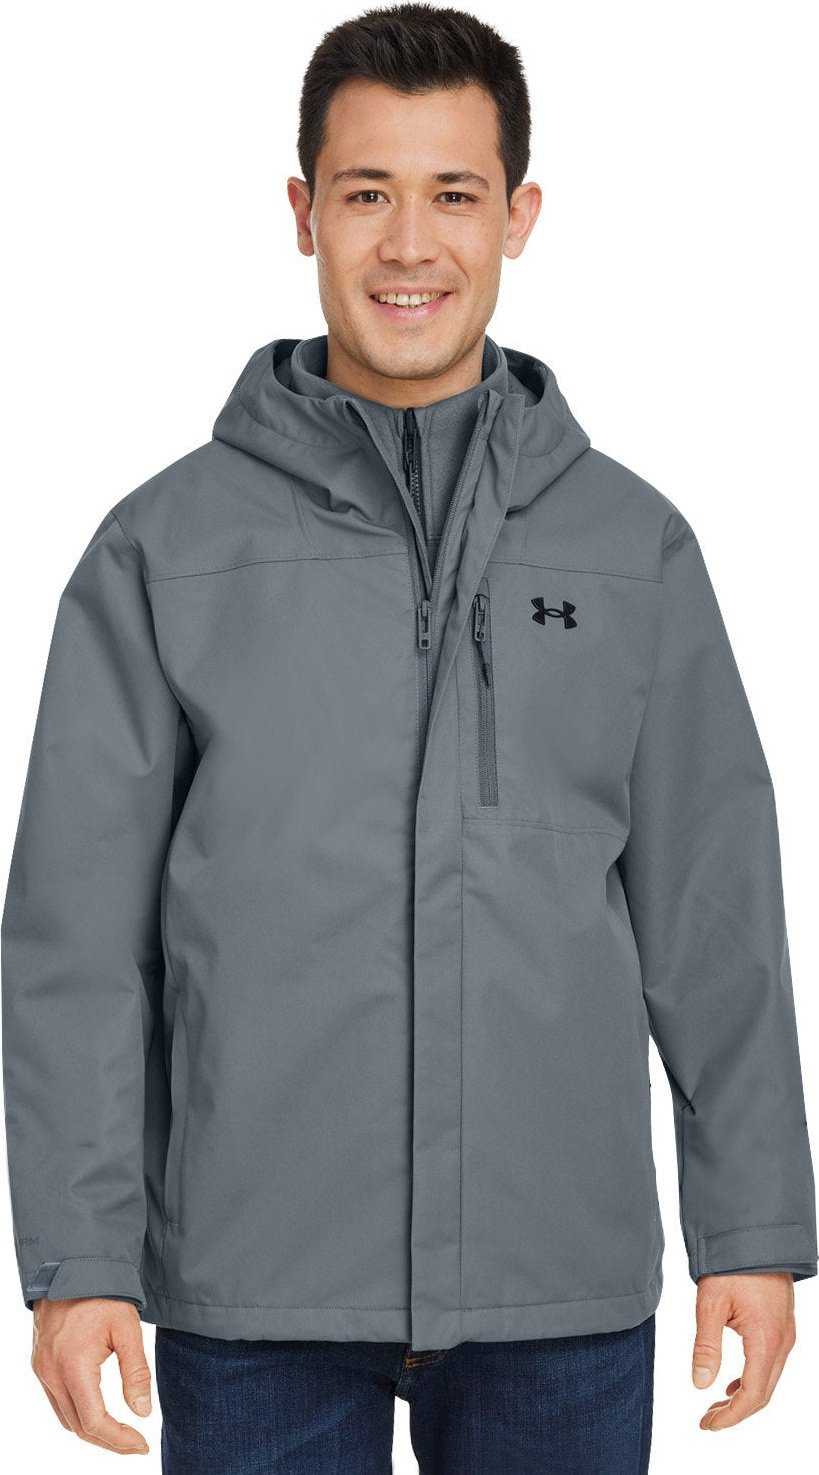 Under Armour 1371585 Mens Porter 3-In-1 2.0 Jacket - Pitch Gray Black